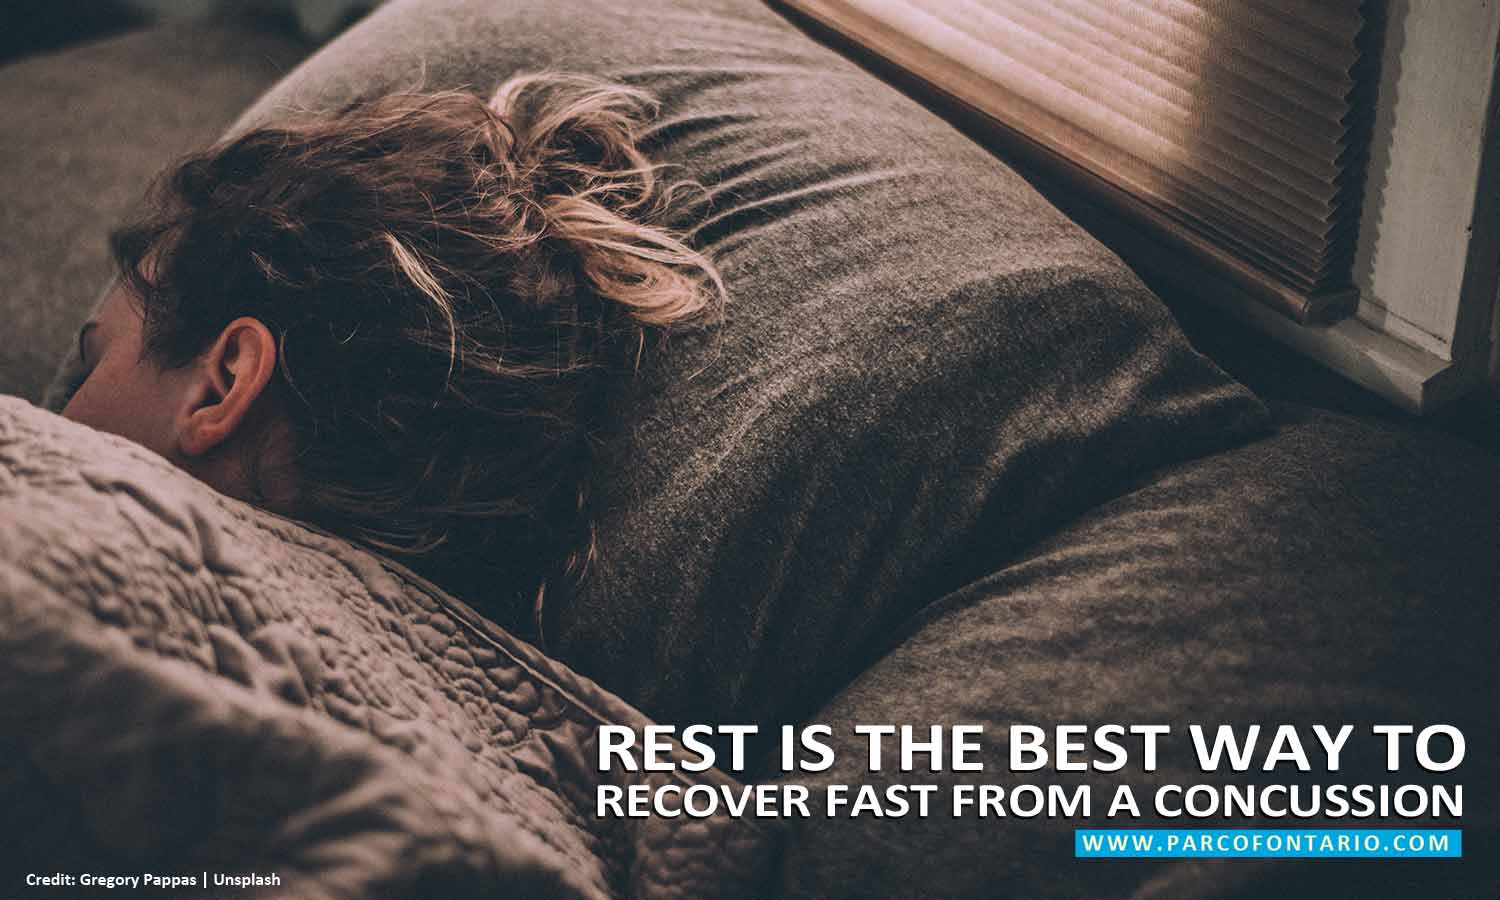 Rest-is-the-best-way-to-recover-fast-from-a-concussion